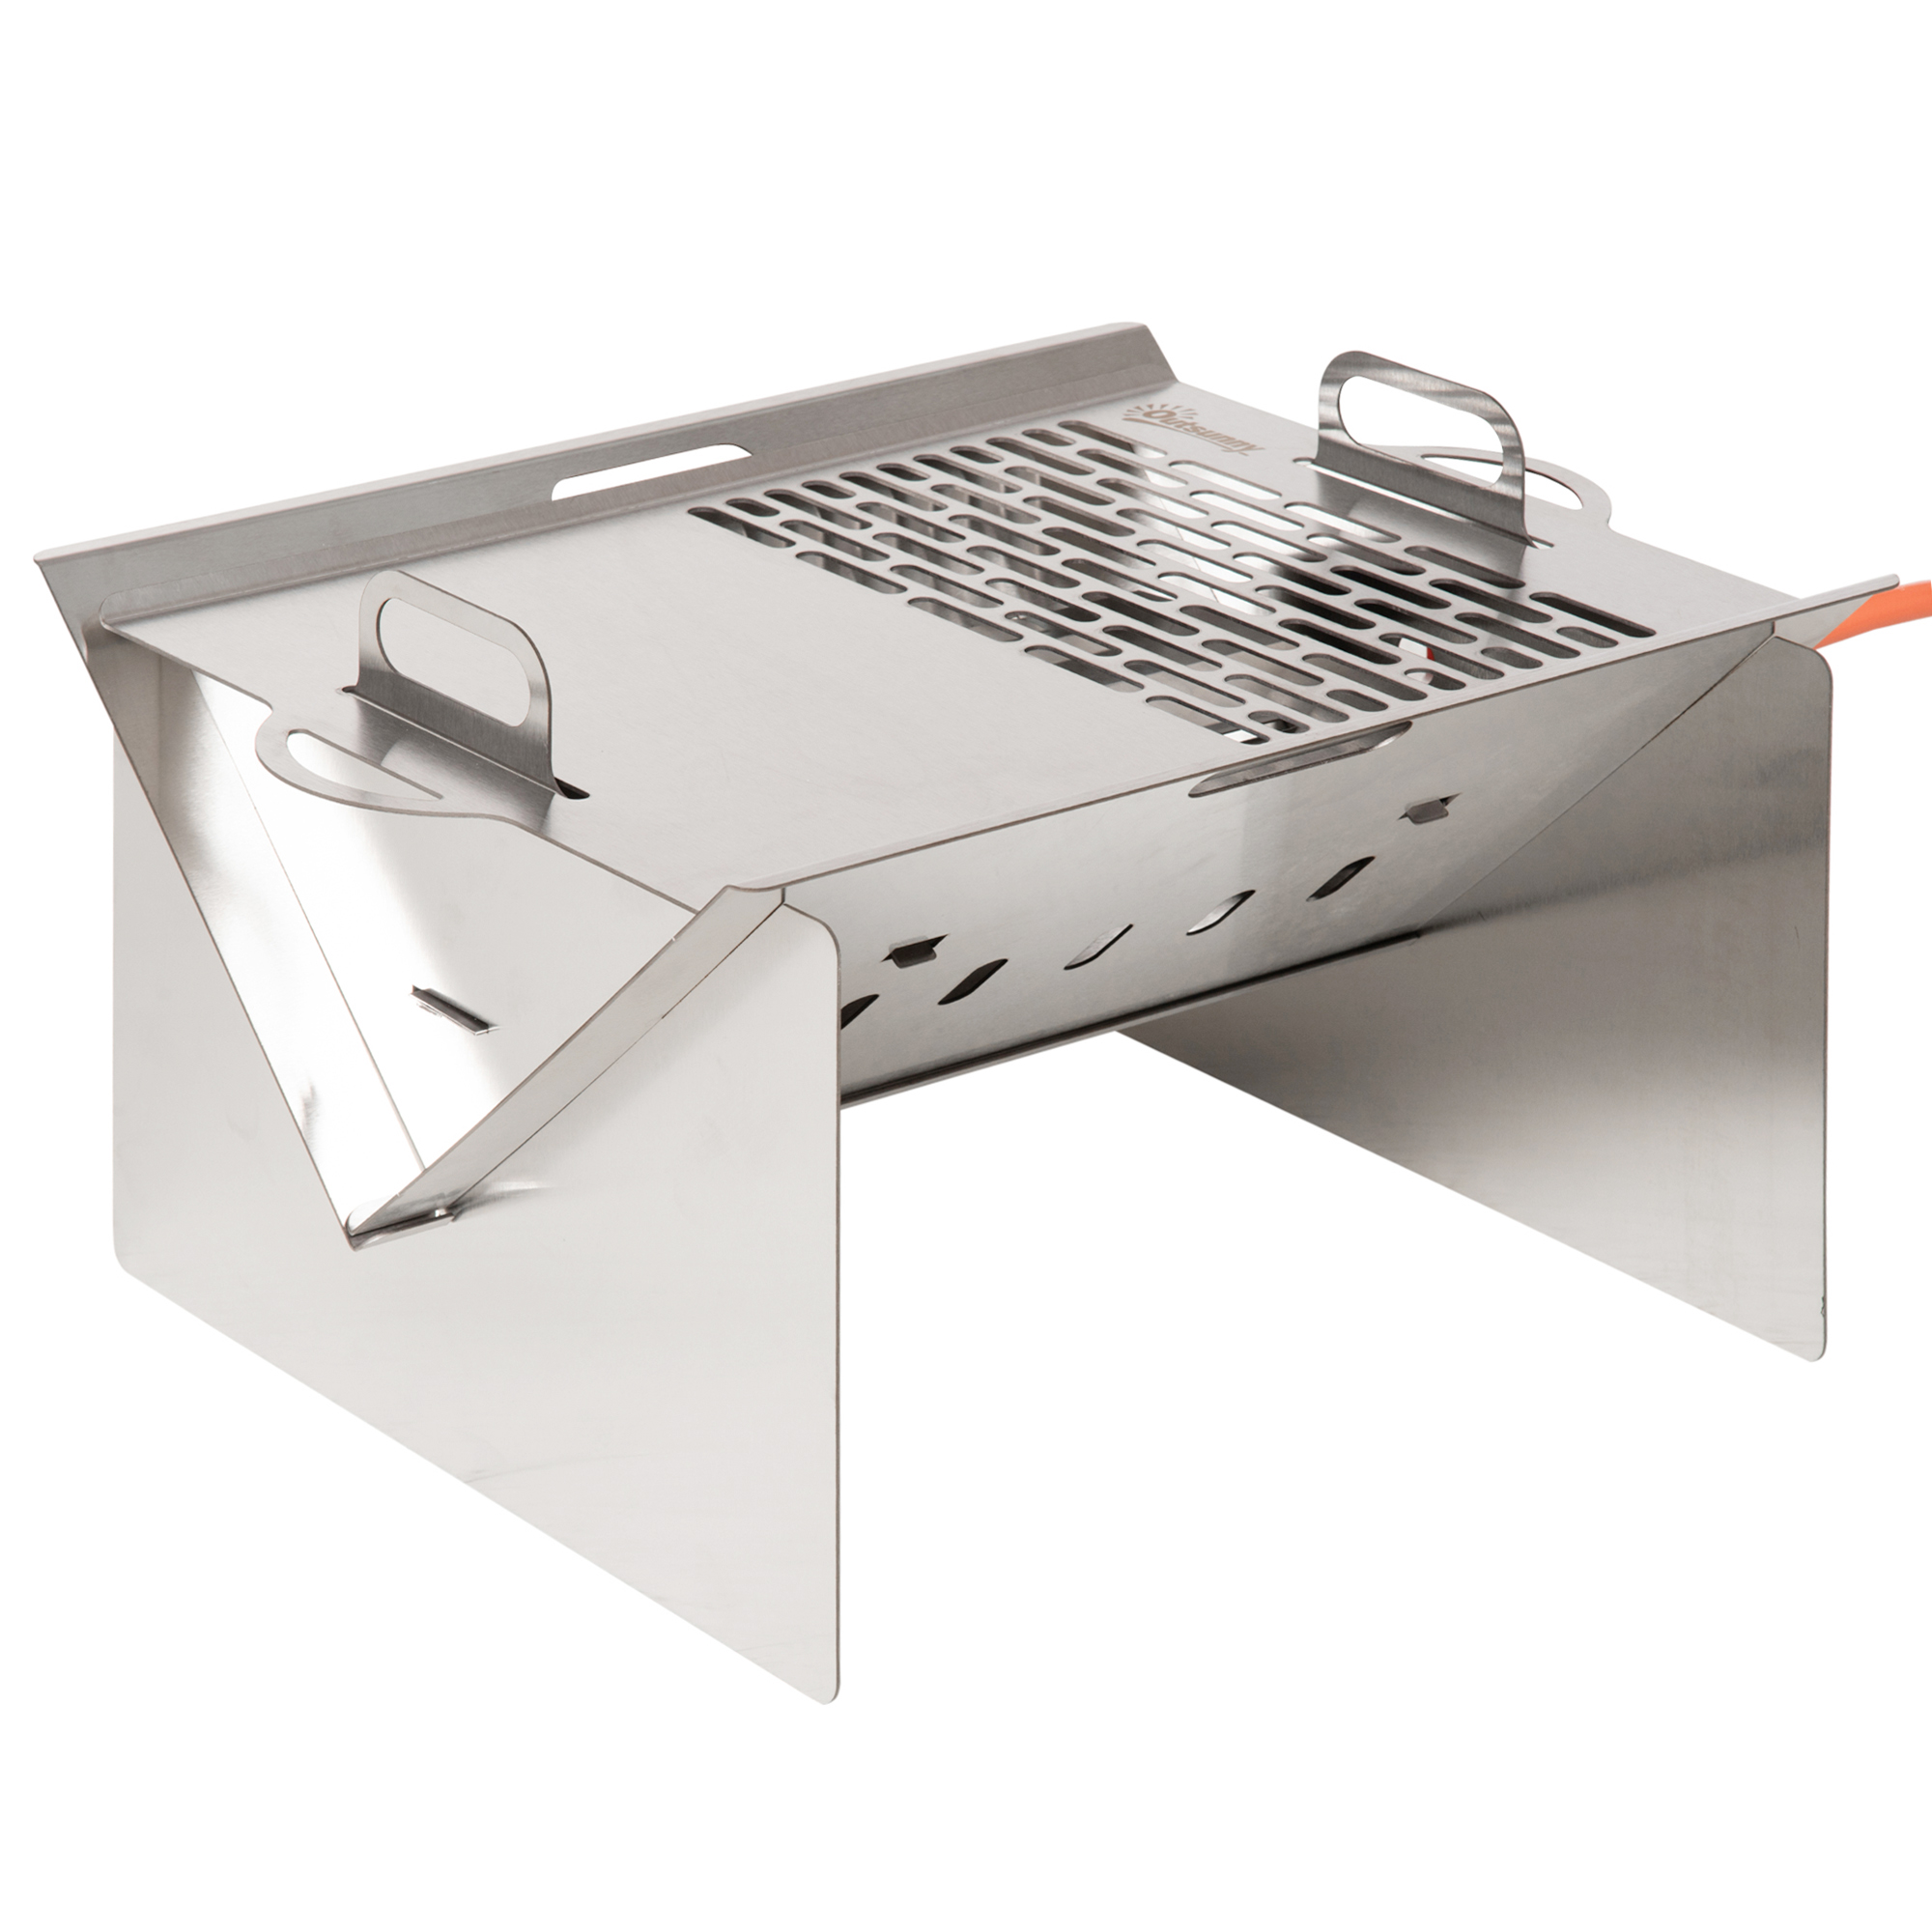 Outsunny Tischgrill Gasgrill BBQ abnehmbar Holzkohle Camping Grill mit Gril günstig online kaufen